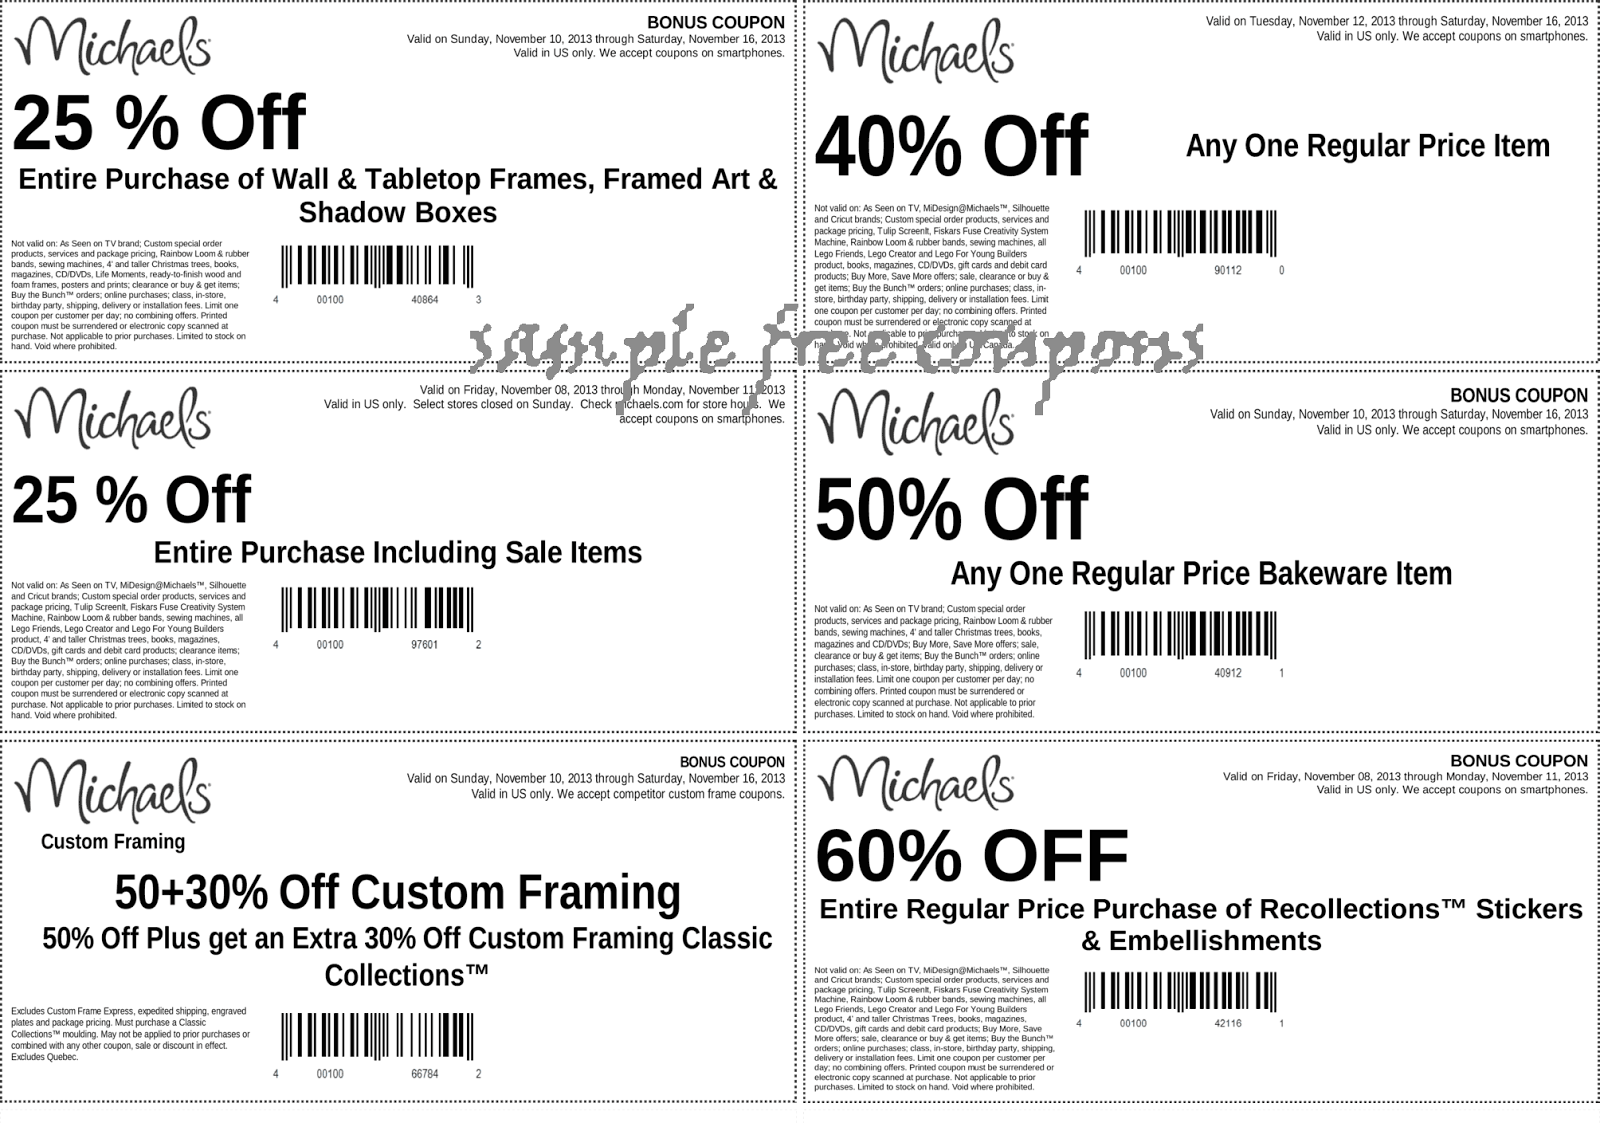 cotton-tote-bags-michaels-in-store-coupons-printable